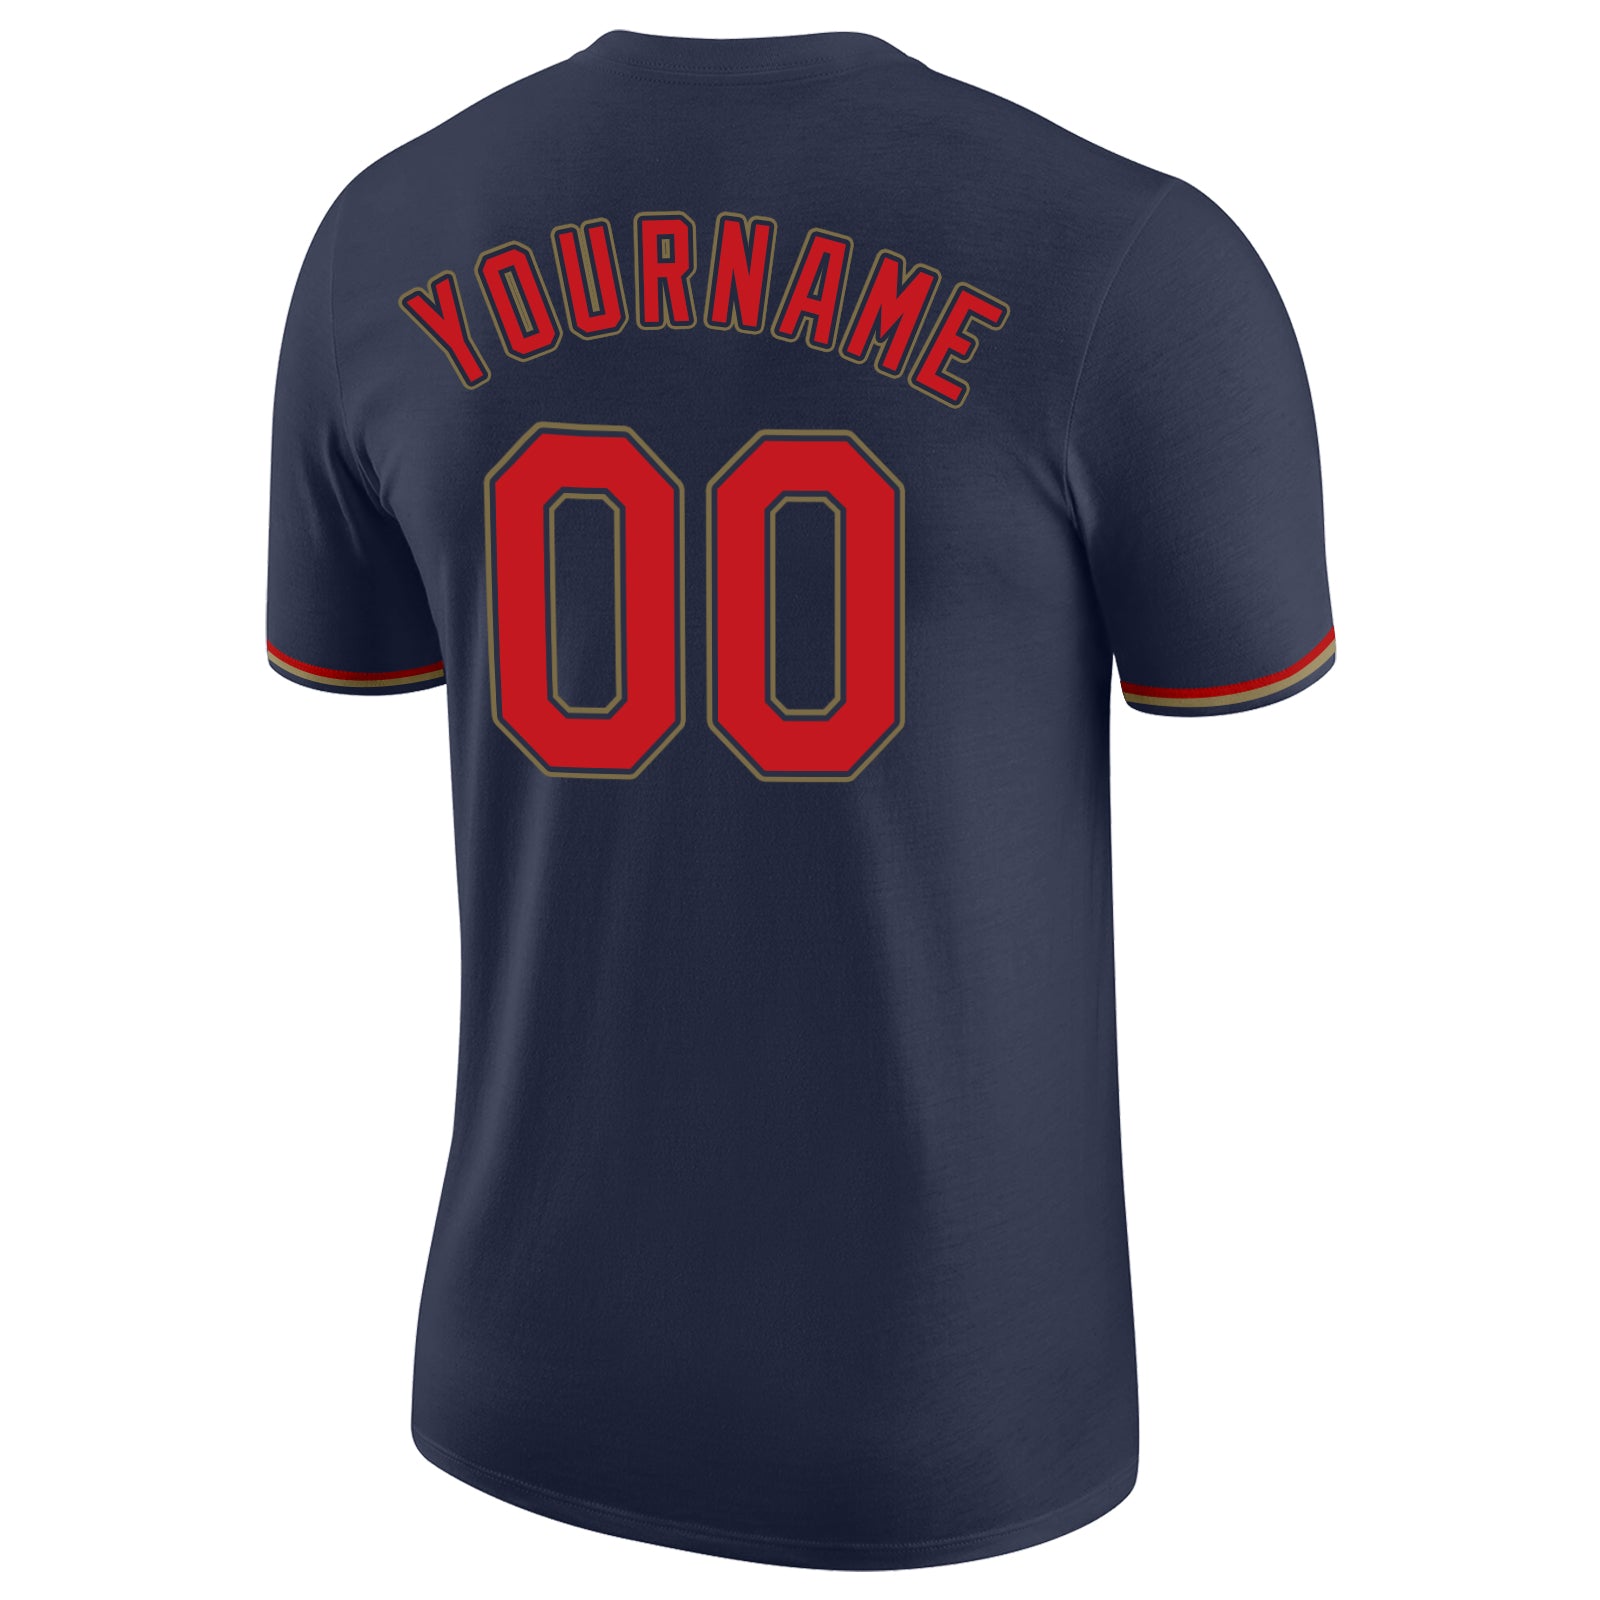 Custom Navy Red-Old Gold Performance T-Shirt